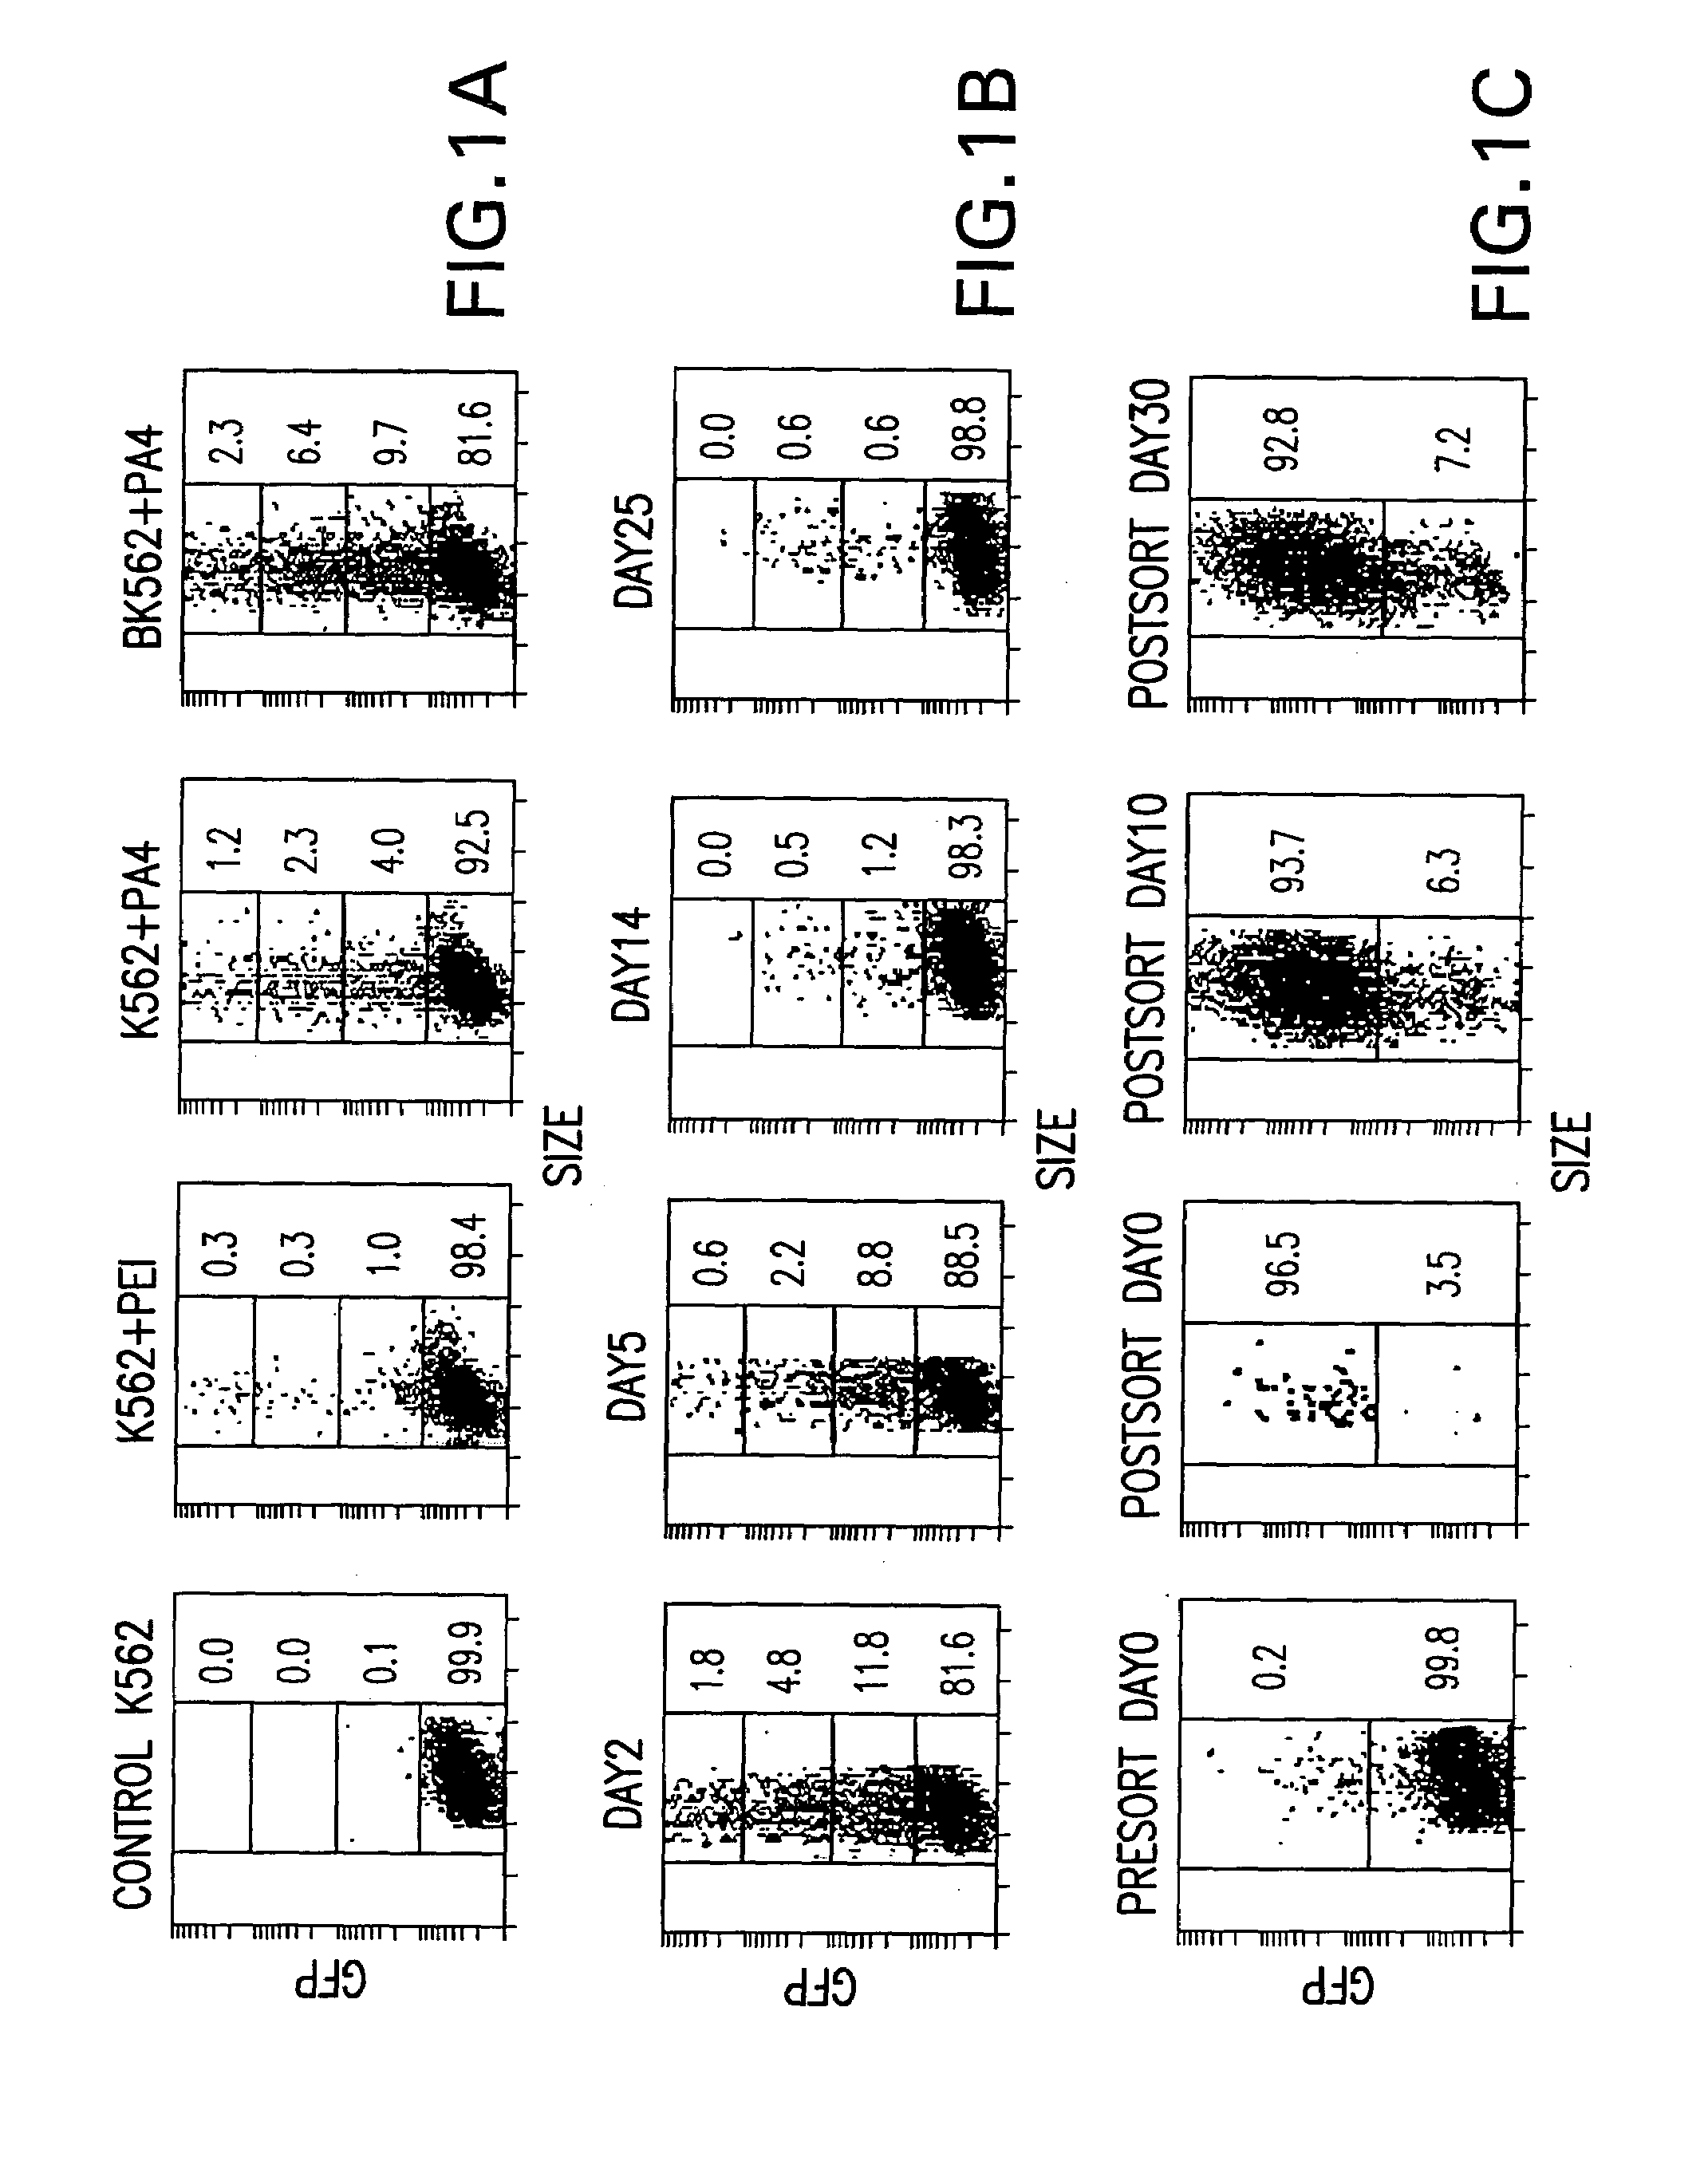 Methods for delivering biologically active molecules into cells